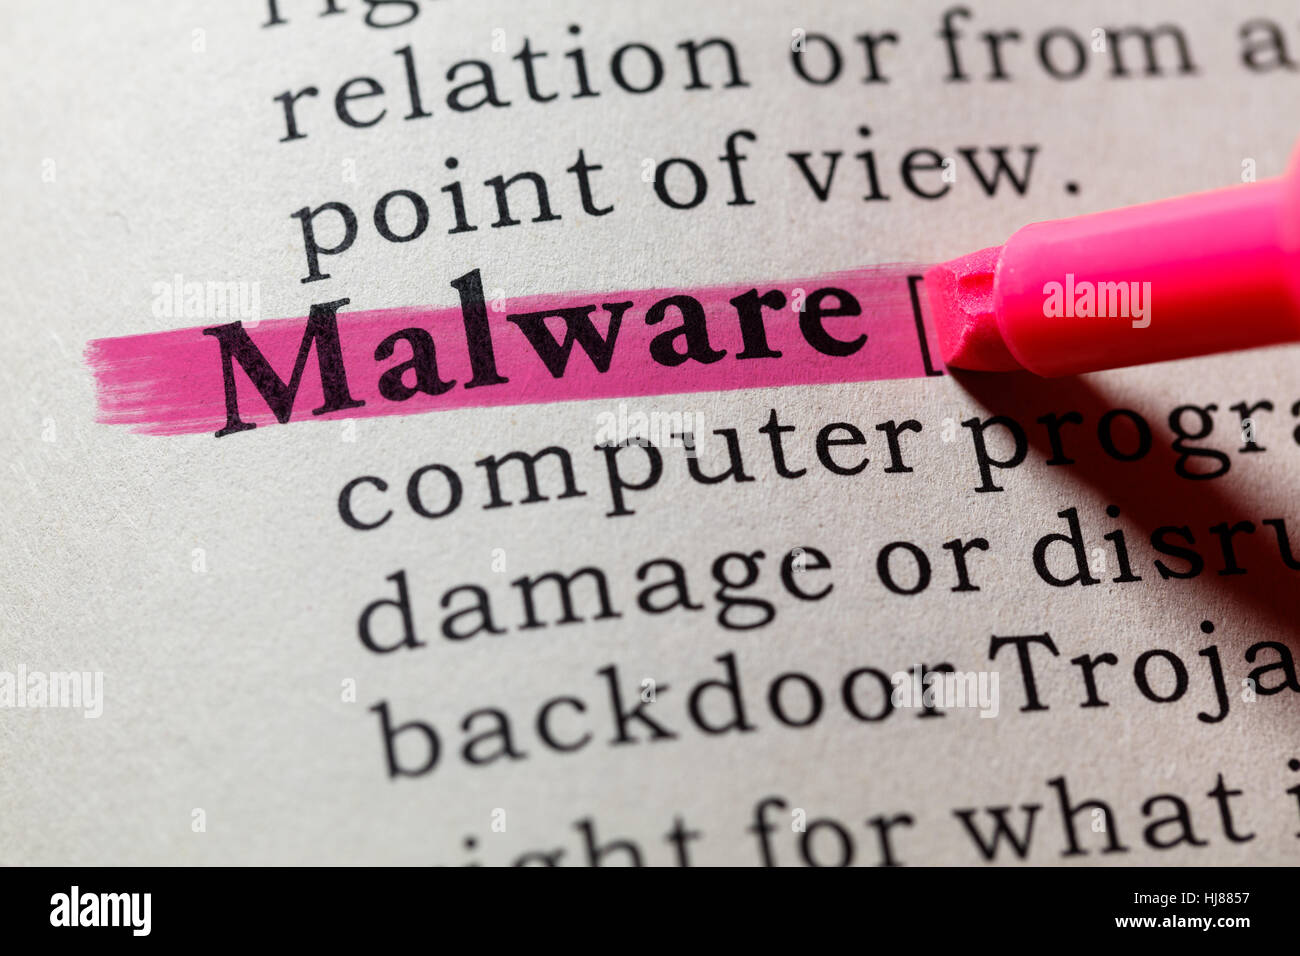 Fake Dictionary, Dictionary definition of the word Malware. including key descriptive words. Stock Photo